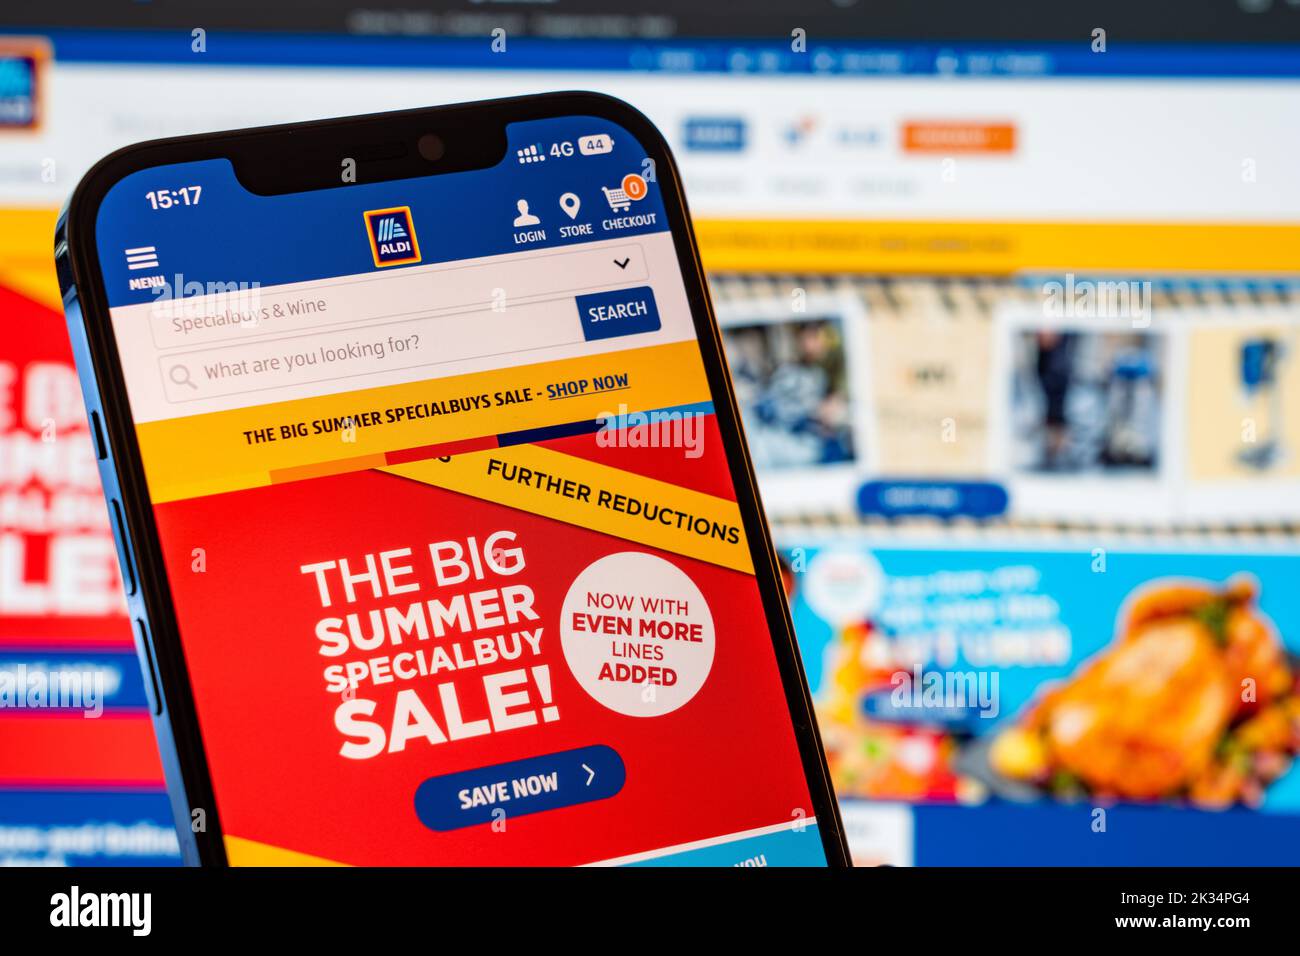 Aldi Mobile Website with laptop website in the background Stock Photo